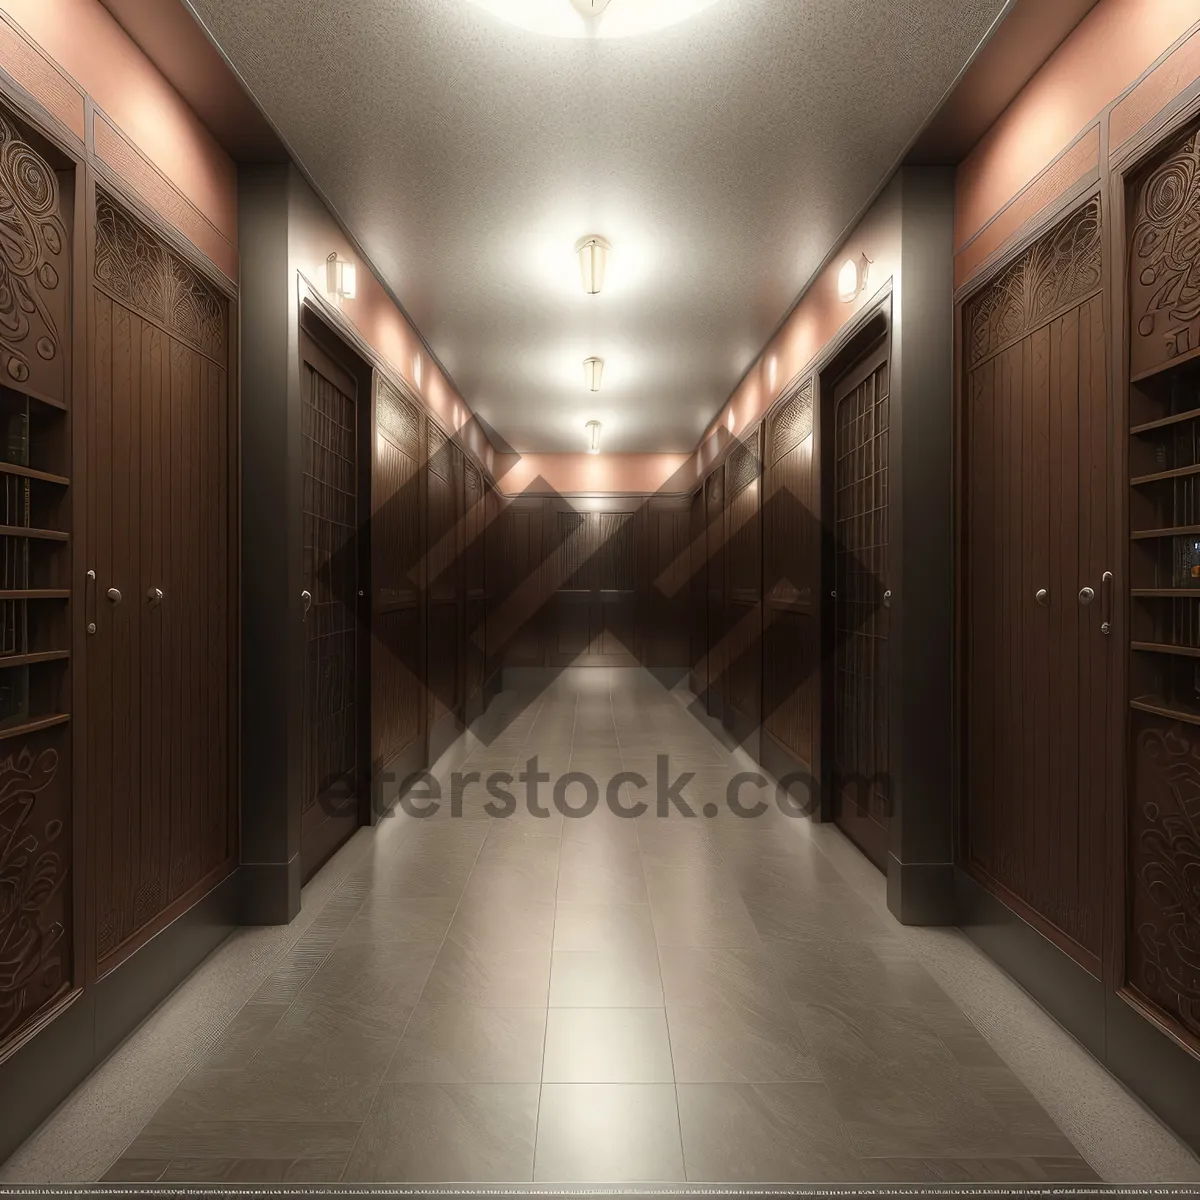 Picture of Modern Interior Hallway with Illuminated Column in Basement